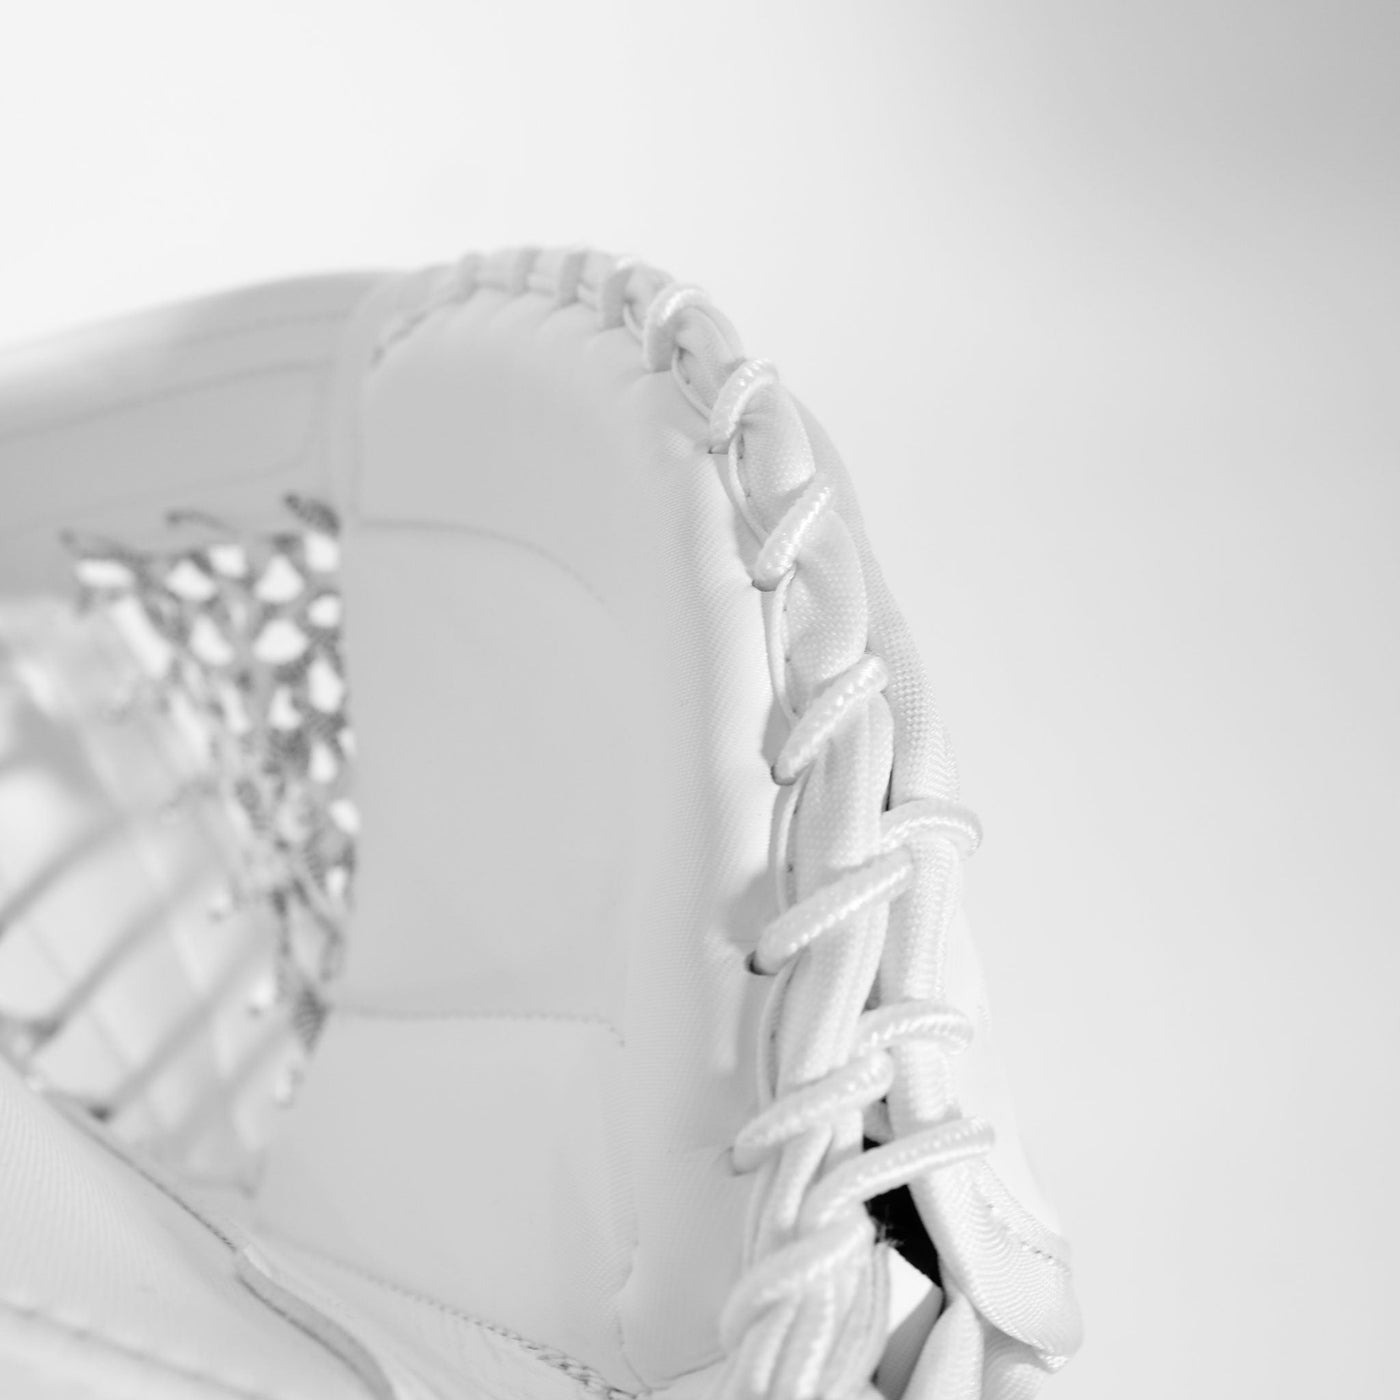 CCM Axis 2.9 Senior Goalie Catcher - Source Exclusive - The Hockey Shop Source For Sports